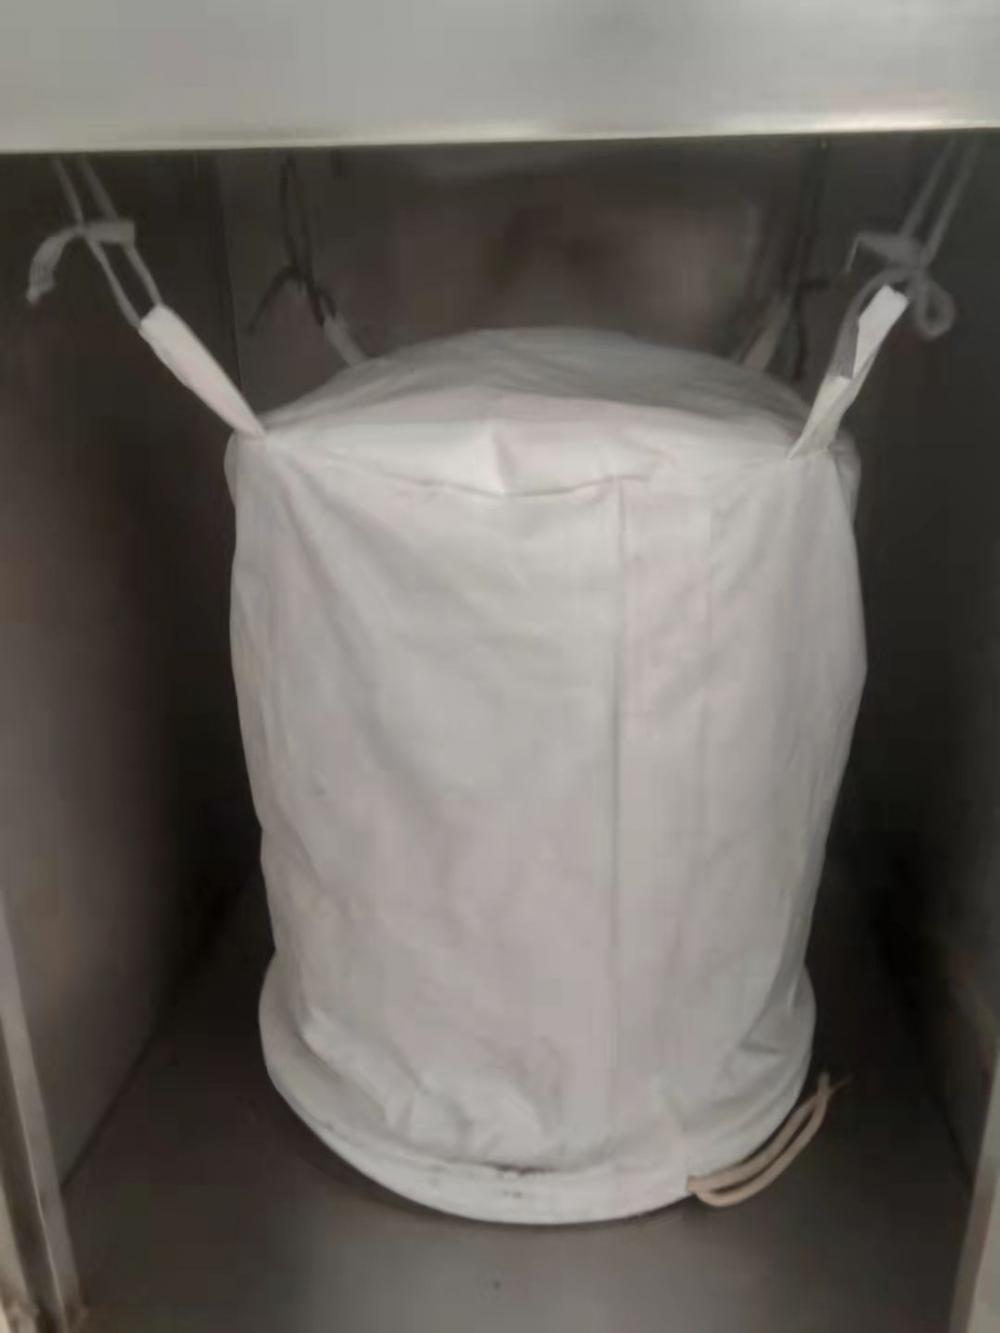 Dust Collector Bag